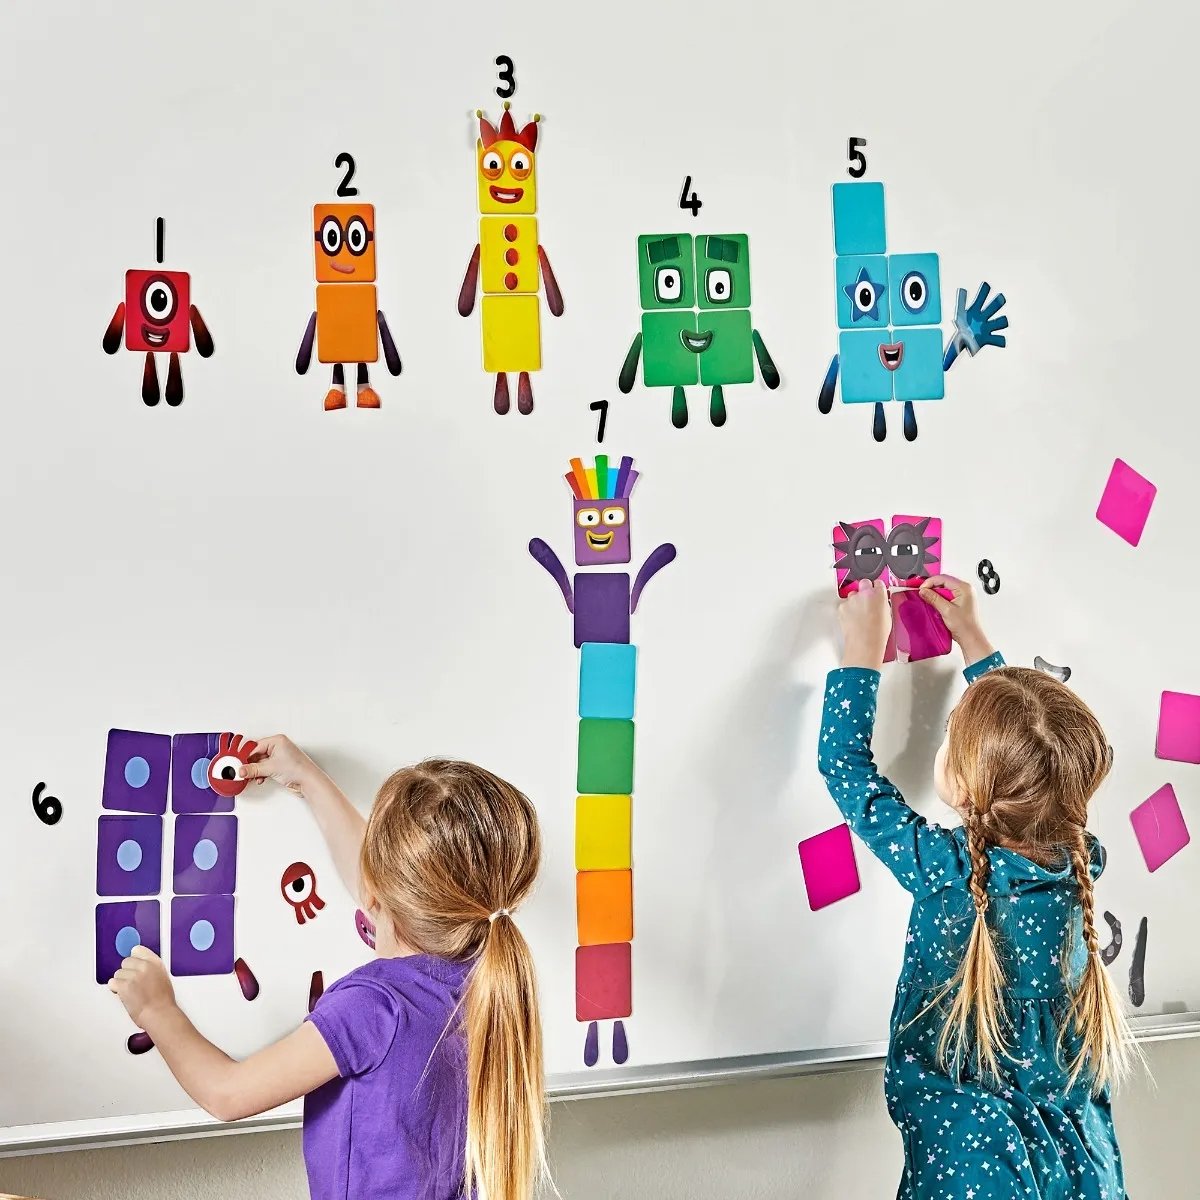 Numberblocks Reusable Clings, Recreate the Numberblocks One to Ten on smooth surfaces such as windows and whiteboards and bring the number magic from the award-winning Numberblocks TV series to life in news ways for young children. Made from an innovative, durable material, Numberblocks Reusable Clings are easy to DIY, and can be repositioned over and over again. This Numberblocks Reusable Clings set has all the pieces needed to recreate Numberblocks One to Ten with extra poses for Four, Five, Eight, Nine a